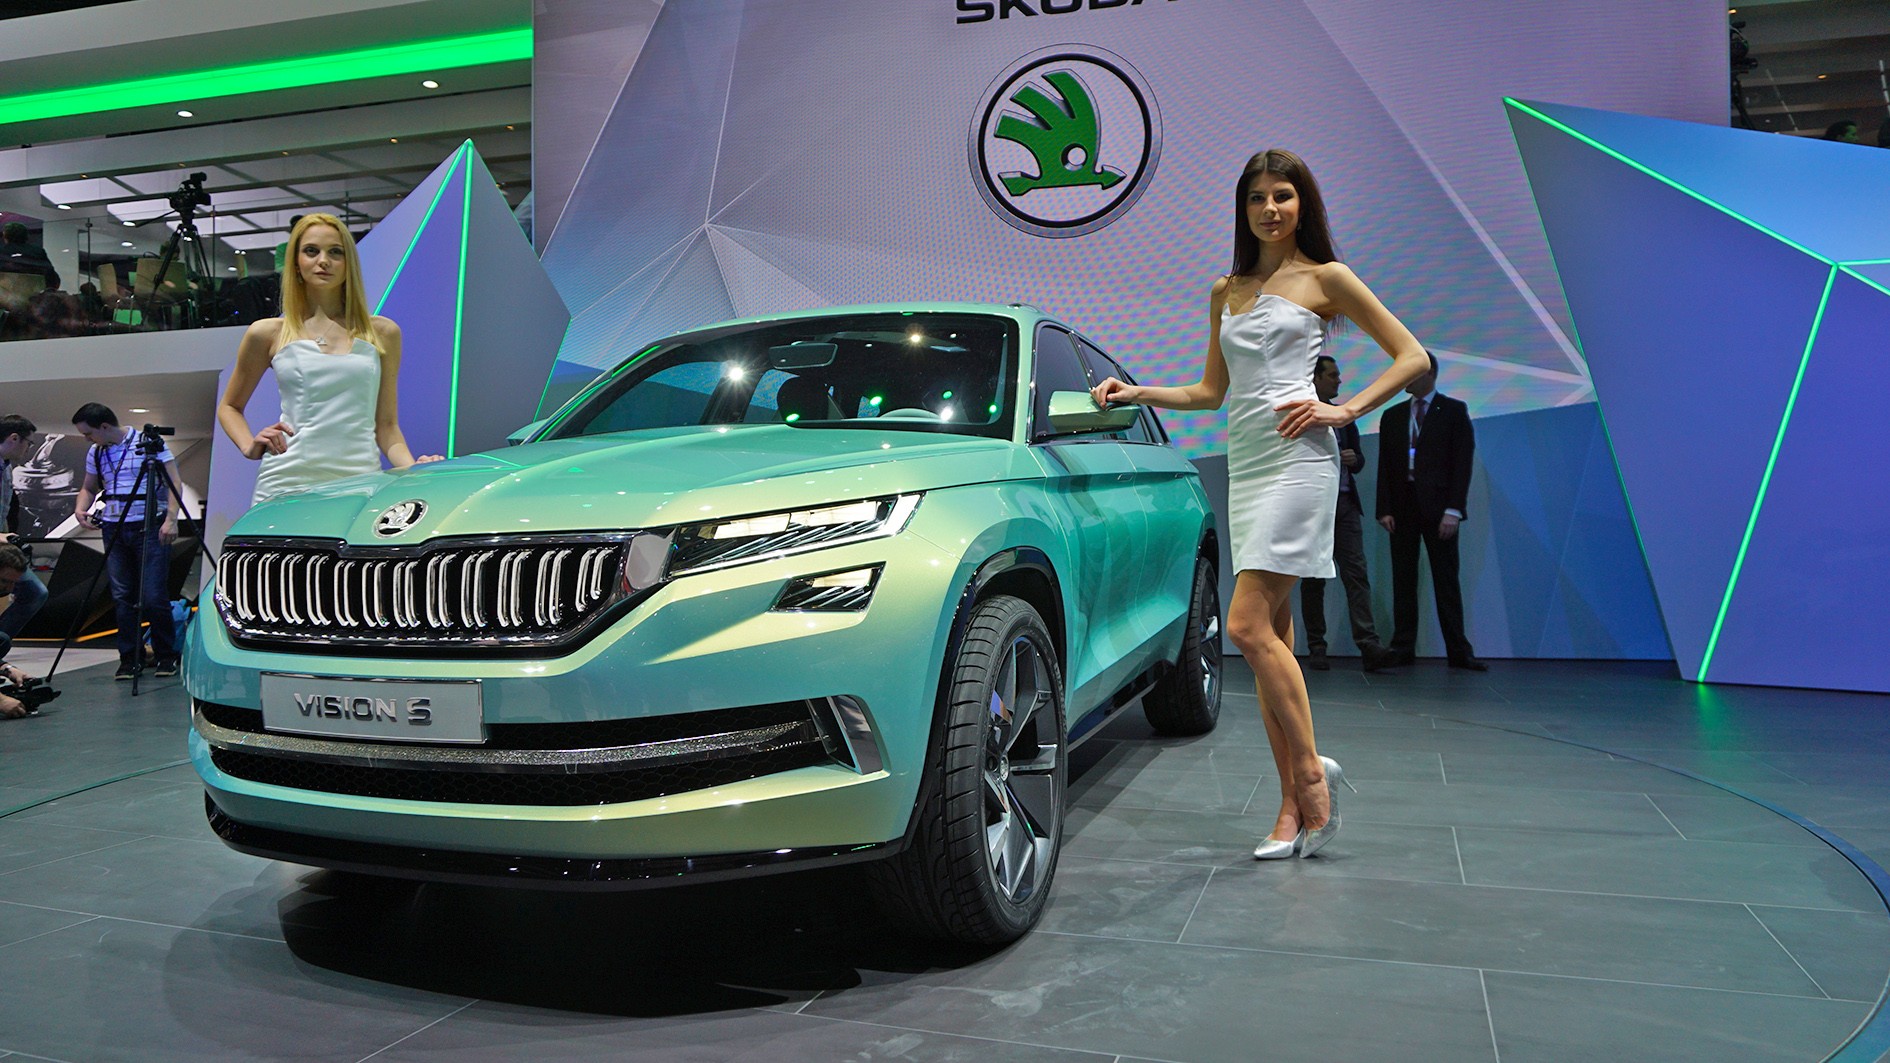 Skoda VisionS front view